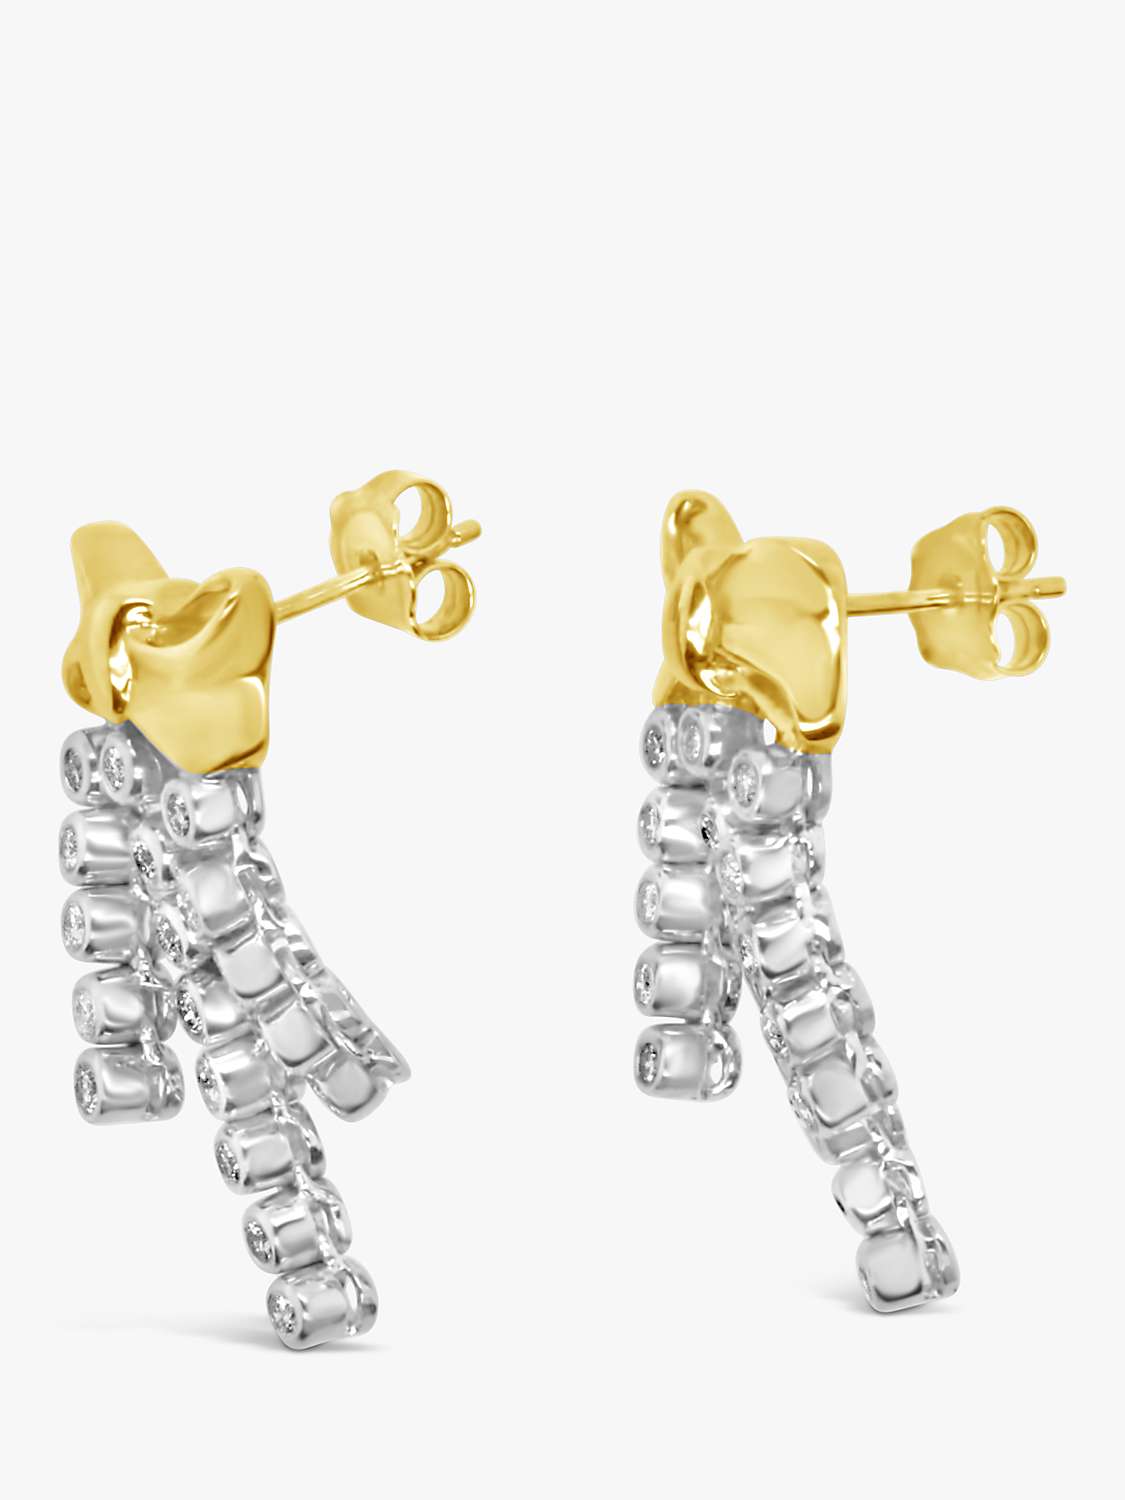 Buy Milton & Humble Jewellery Second Hand White & Yellow Gold Diamond Drop Earrings Online at johnlewis.com